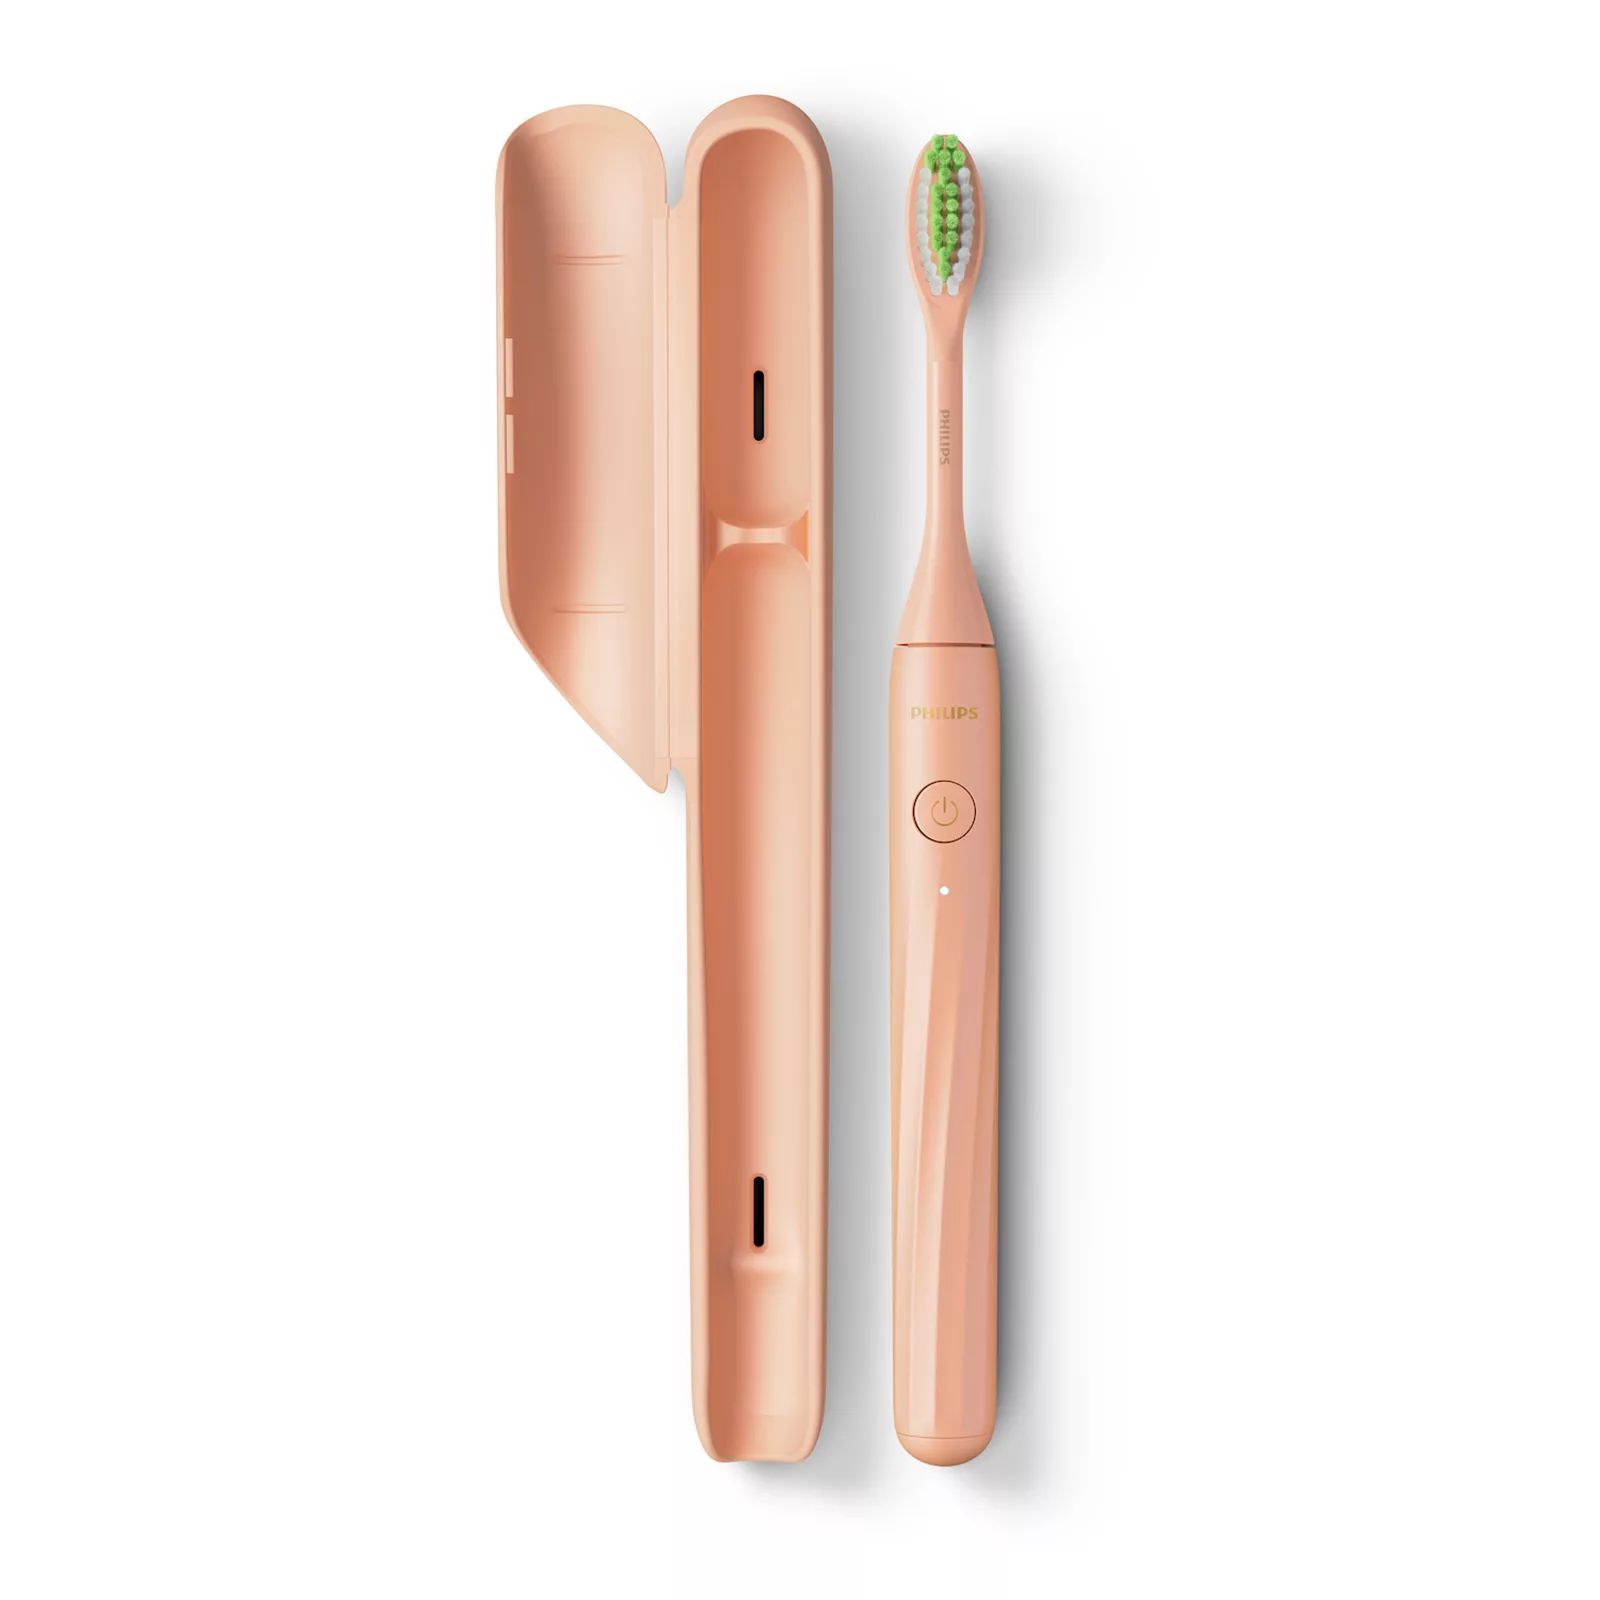 Philips One by Sonicare Rechargeable Toothbrush, Shimmer | Kohl's